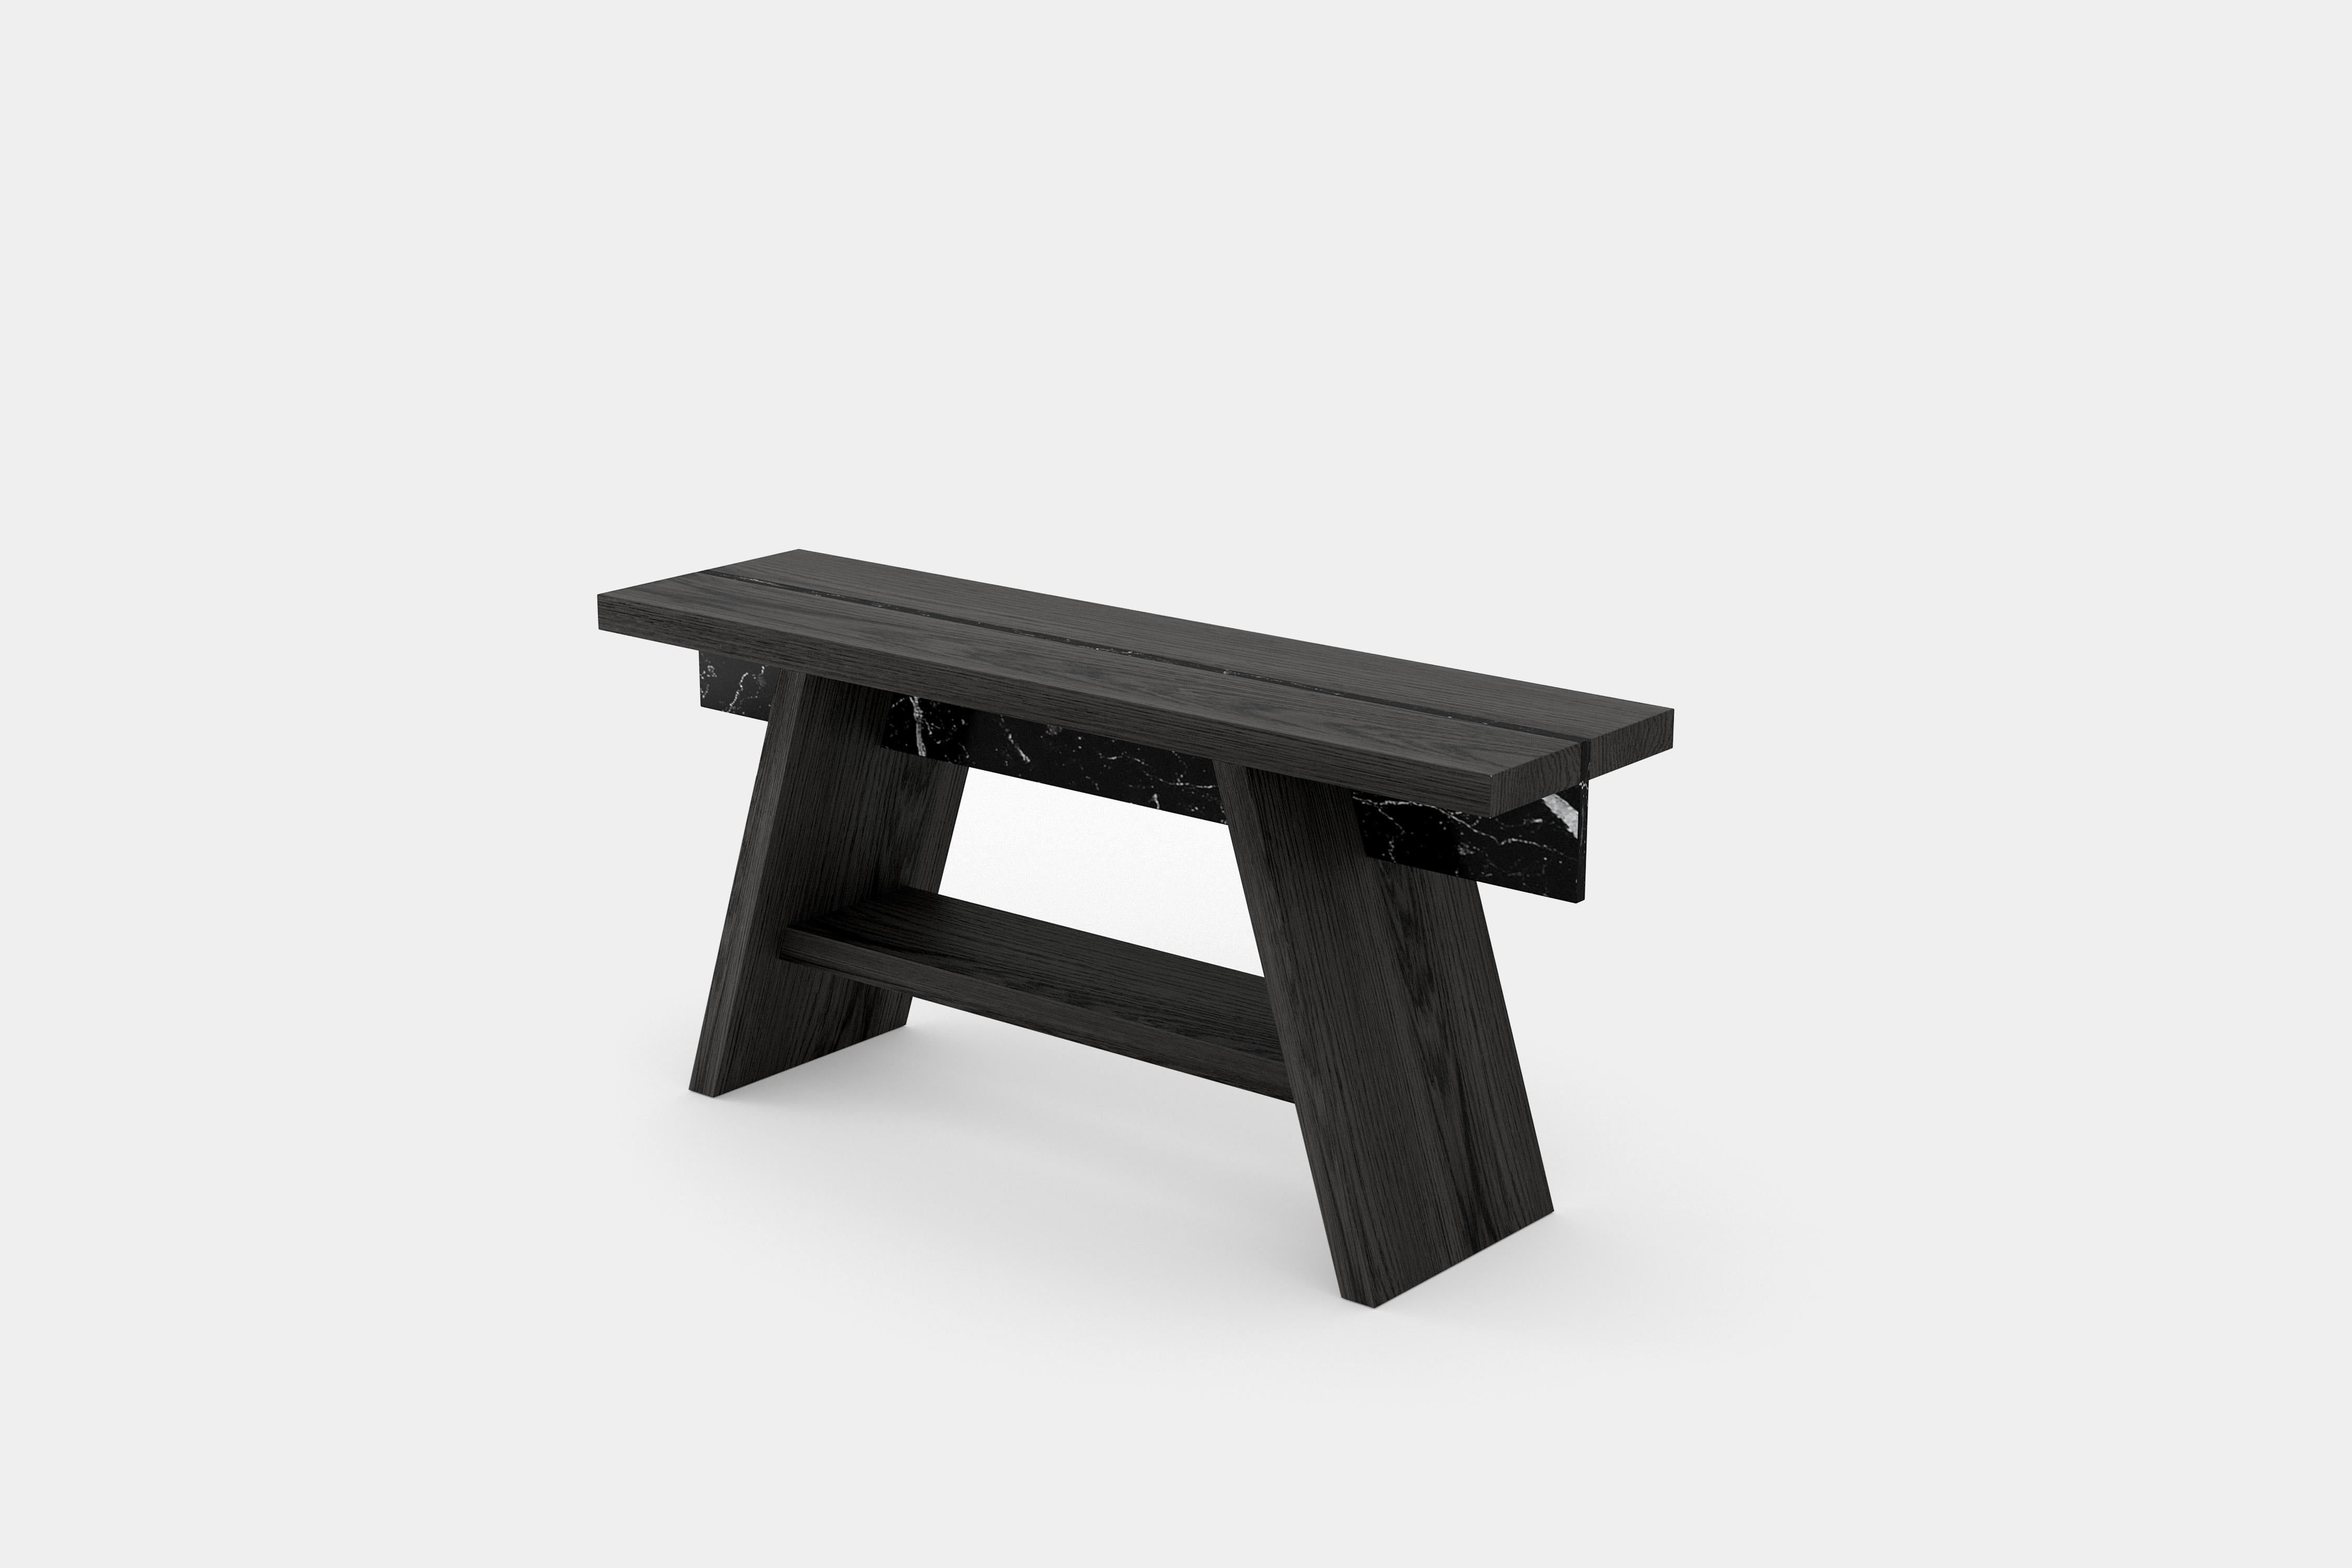 Laws of Motion Sofa Back in Solid Black Wood, Console Table by Joel Escalona

Laws of Motion is a furniture collection that through a series of different typologies explores concepts like force, gravity and movement. Each of these functional